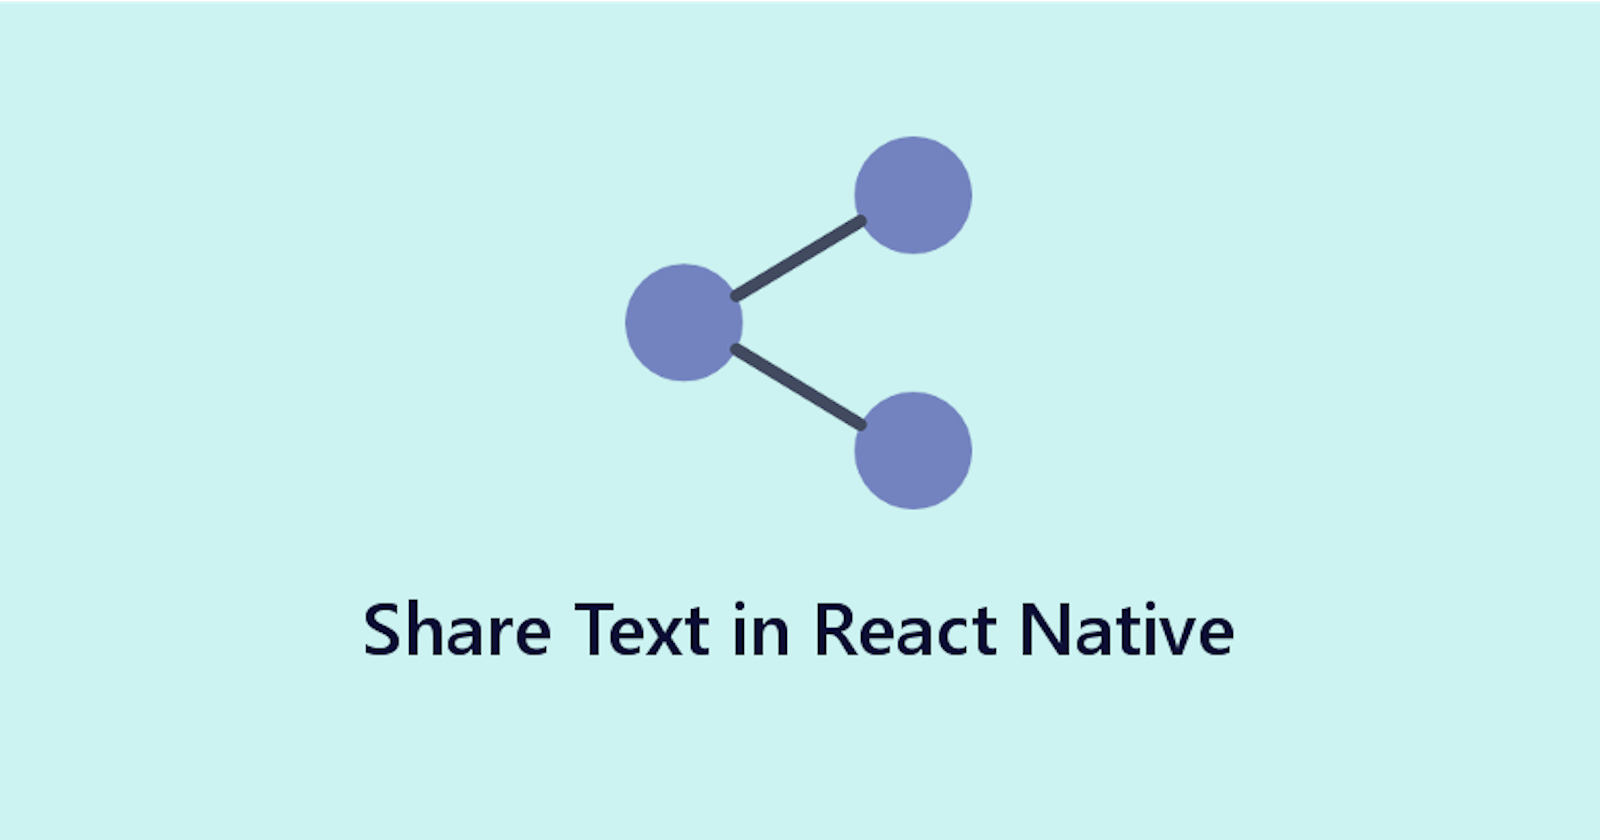 Sharing text, links and images in react native apps